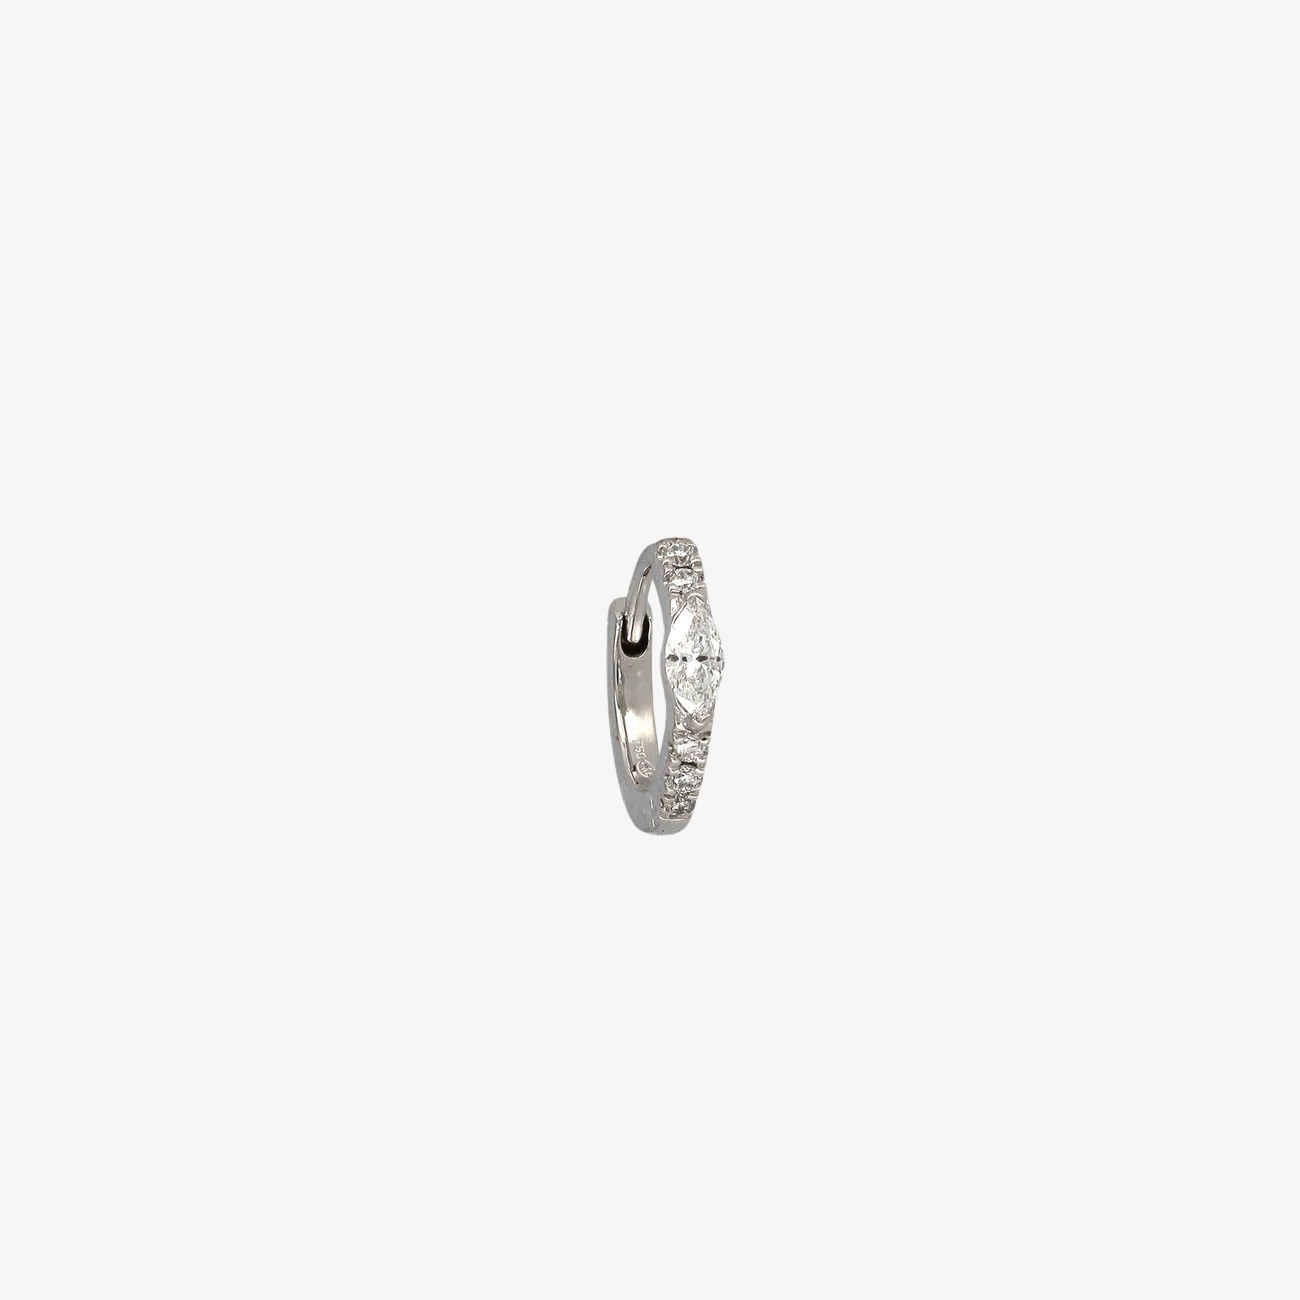 2.8mm Marquise 8mm Half Paved White Gold Hoop